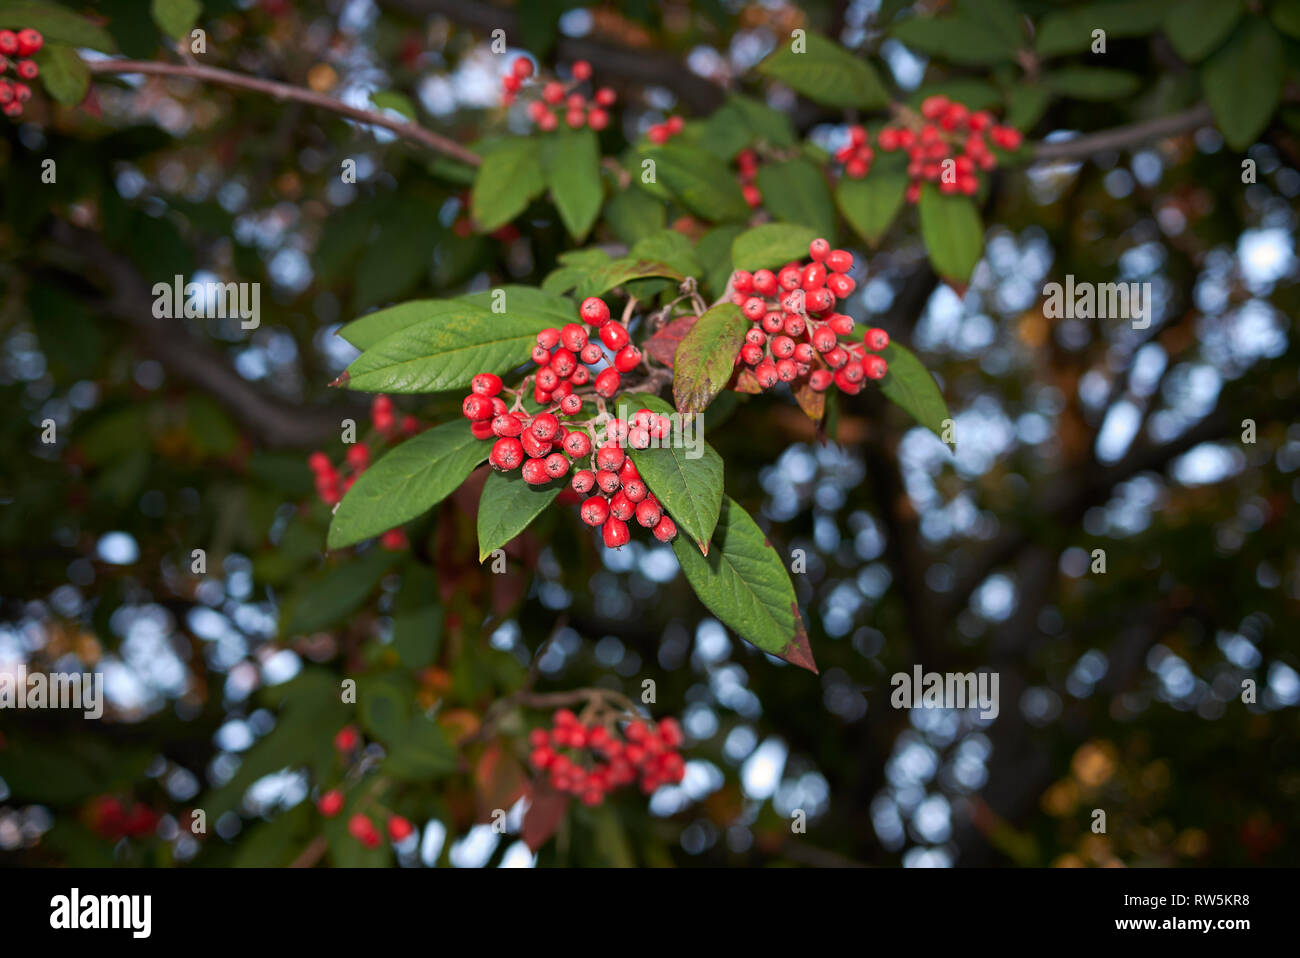 Cotoneaster frigidus branch with red bverries Stock Photo